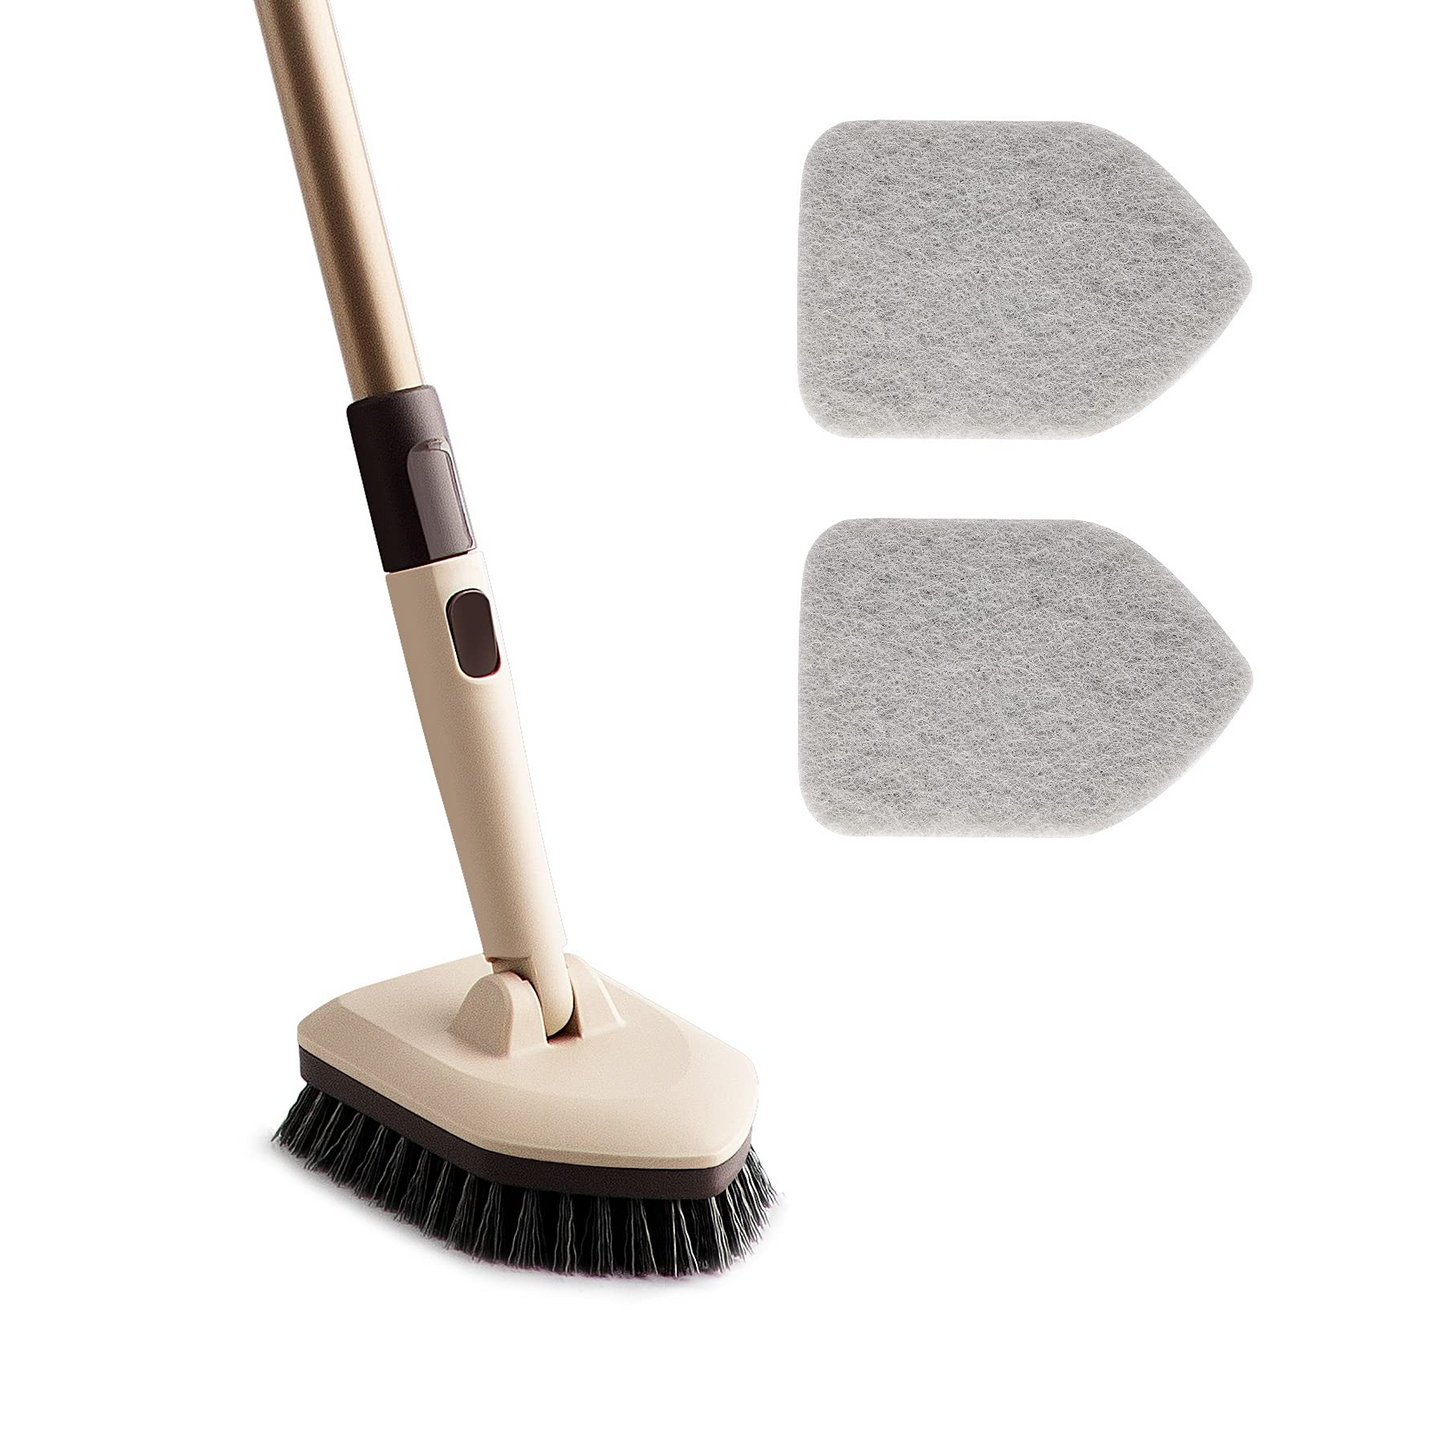 Tub Tile Scrubber Extendable Long Handle 58,Shower Cleaning Brush